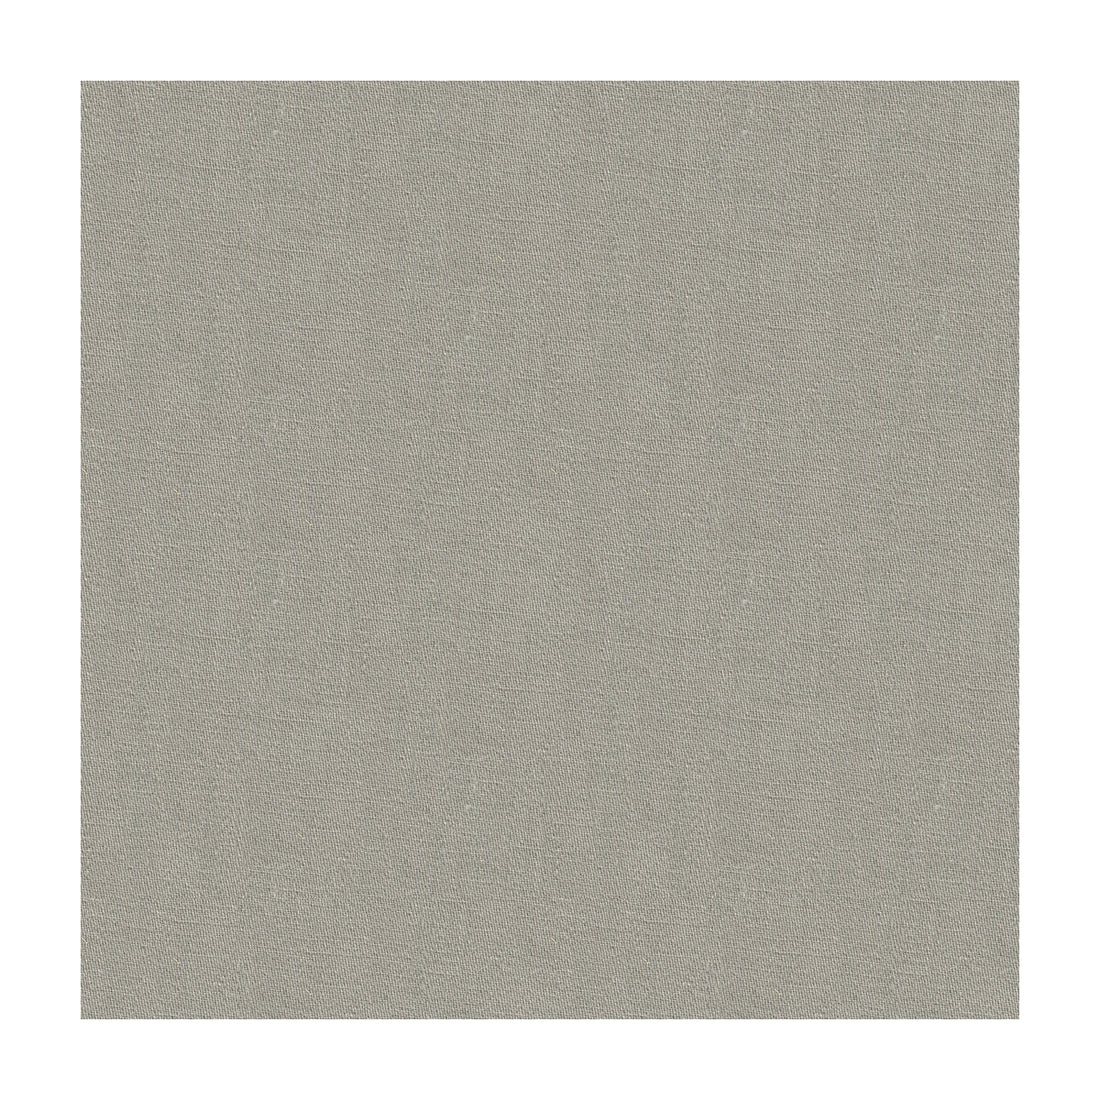 Otes Solid fabric in pebble color - pattern 8015167.21.0 - by Brunschwig &amp; Fils in the L&